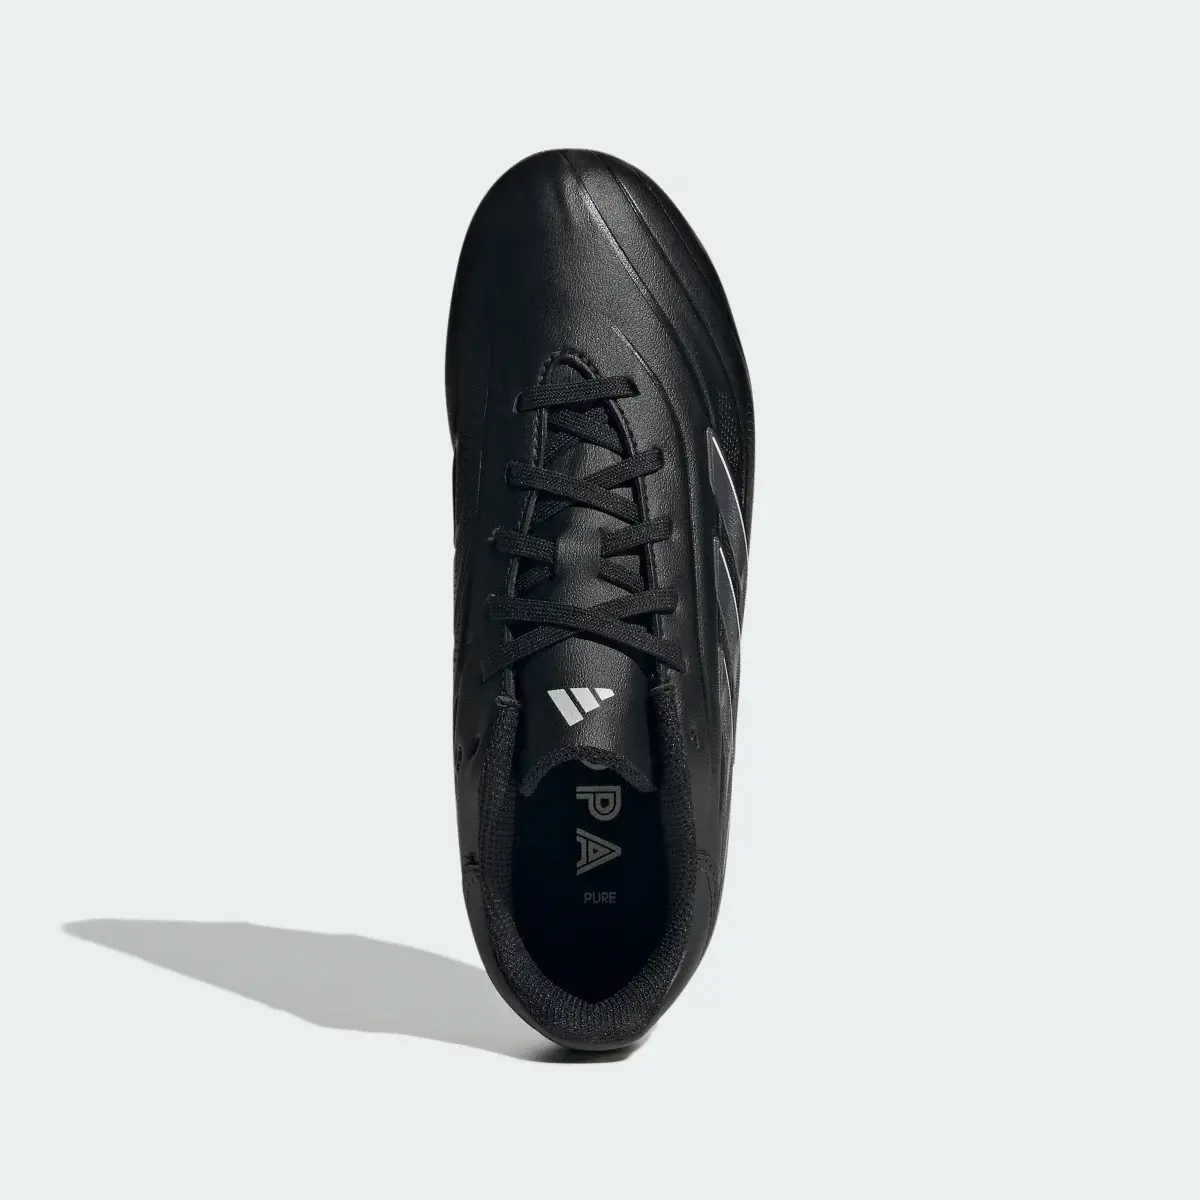 Adidas Copa Pure II League Firm Ground Cleats. 3